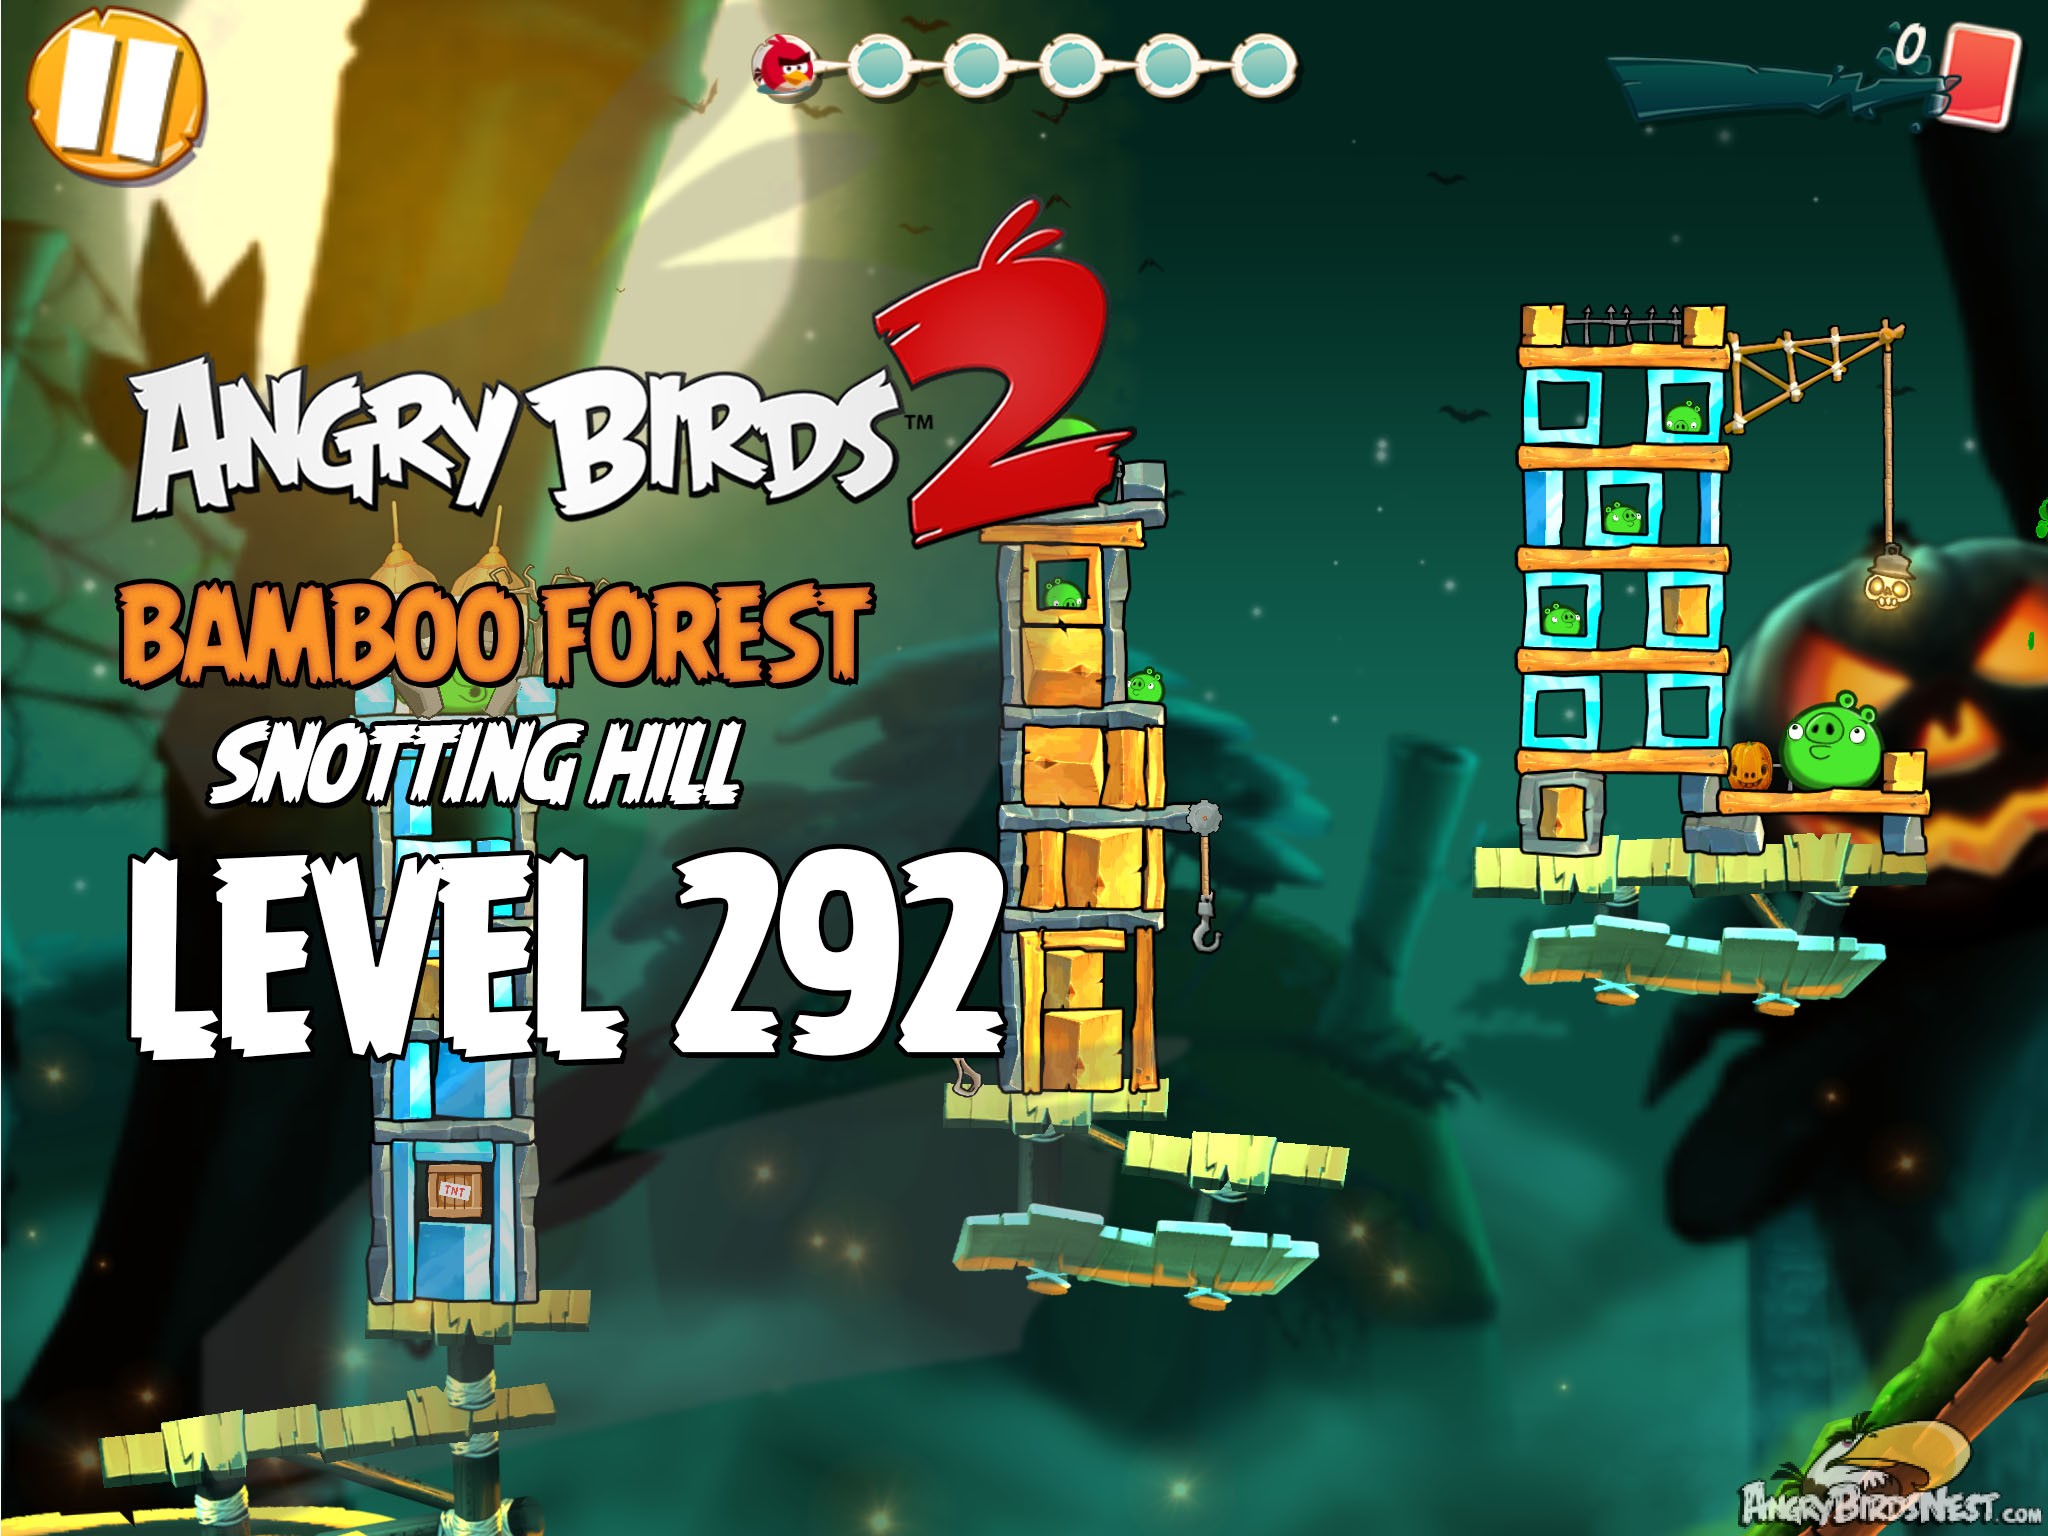 Angry Birds 2 Bambbo Forest Snotting Hill Level 292